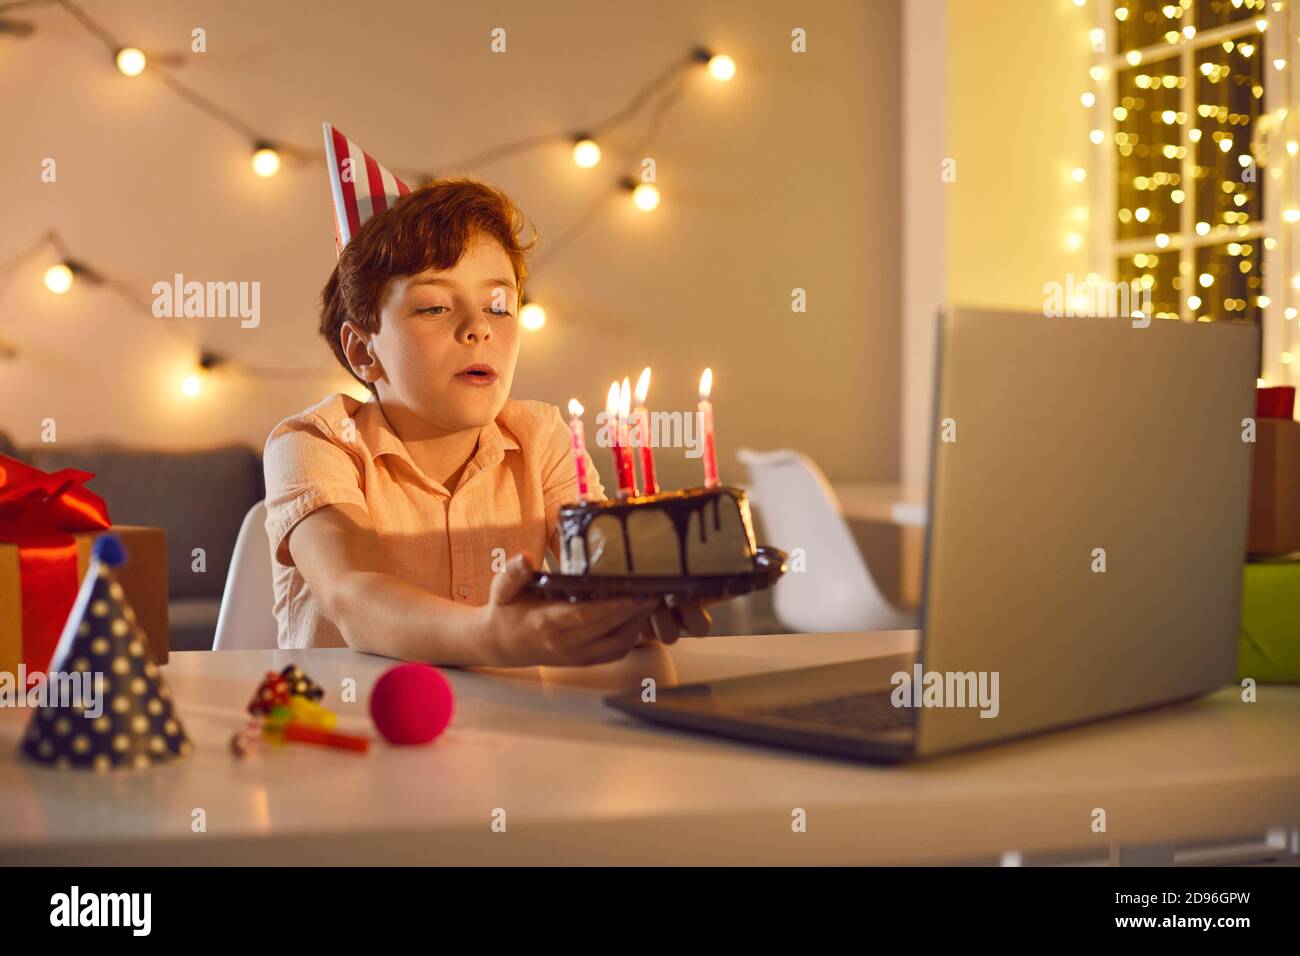 Little birthday boy making a wish and blowing burning candles on cake during online party at home Stock Photo